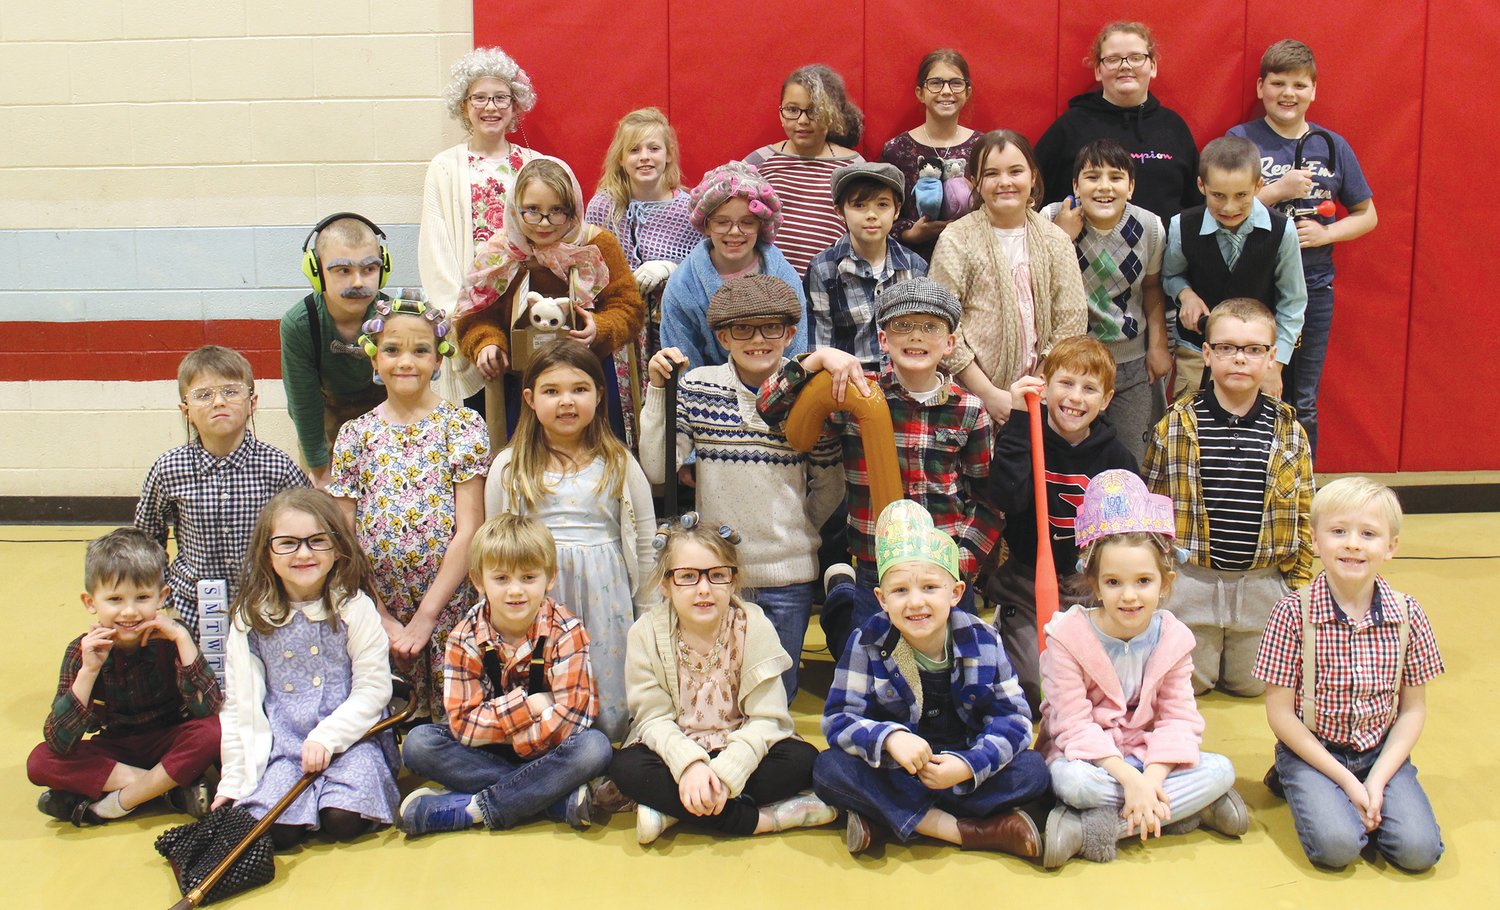 To celebrate being in school for 100 days, Turkey Run Elementary students were encouraged to dress up as 100-year-old people on Monday. Costumes varied from gray hair, canes, pajamas and robes to sweaters and overalls. Activities focused on the number 100 were also completed. These varied from counting out 100 items to writing 100 adjectives to reading books about the 100th day. First grade students made projects with 100 items to show what 100 looks like. In the afternoon, a 100th Day Celebration was held in the gym. Students learned what staff members will look like and will be doing in 100 years, listened to a 100 Day story and song, and participated in a relay race against staff members. Some of the students who dressed up as 100-year-old people are, from left, front frow, Harrison Bridge, Jewell Eldridge, Jacob Newnum, Lyric Breedlove, Charlie Hill, Kayten Faulkner and Bowen Laznik; second row, Havik Roemer, Rebel Roemer, Autumn Wirth, Brady Patton, Jake Sauter, Griffin Woods and Nolan Mayes; third row, Tanner Earley, Ellie Rivers, Ellie Harshman, Carter Chapman, Candice Gillogly, Ezekiel Diaz and Jackson Wrightsman; and back row, Allie Sauter, Cobie McCrory, Nove DeBord, Paige Rose, Bayleigh Wallace and Hagen Jeffrey.